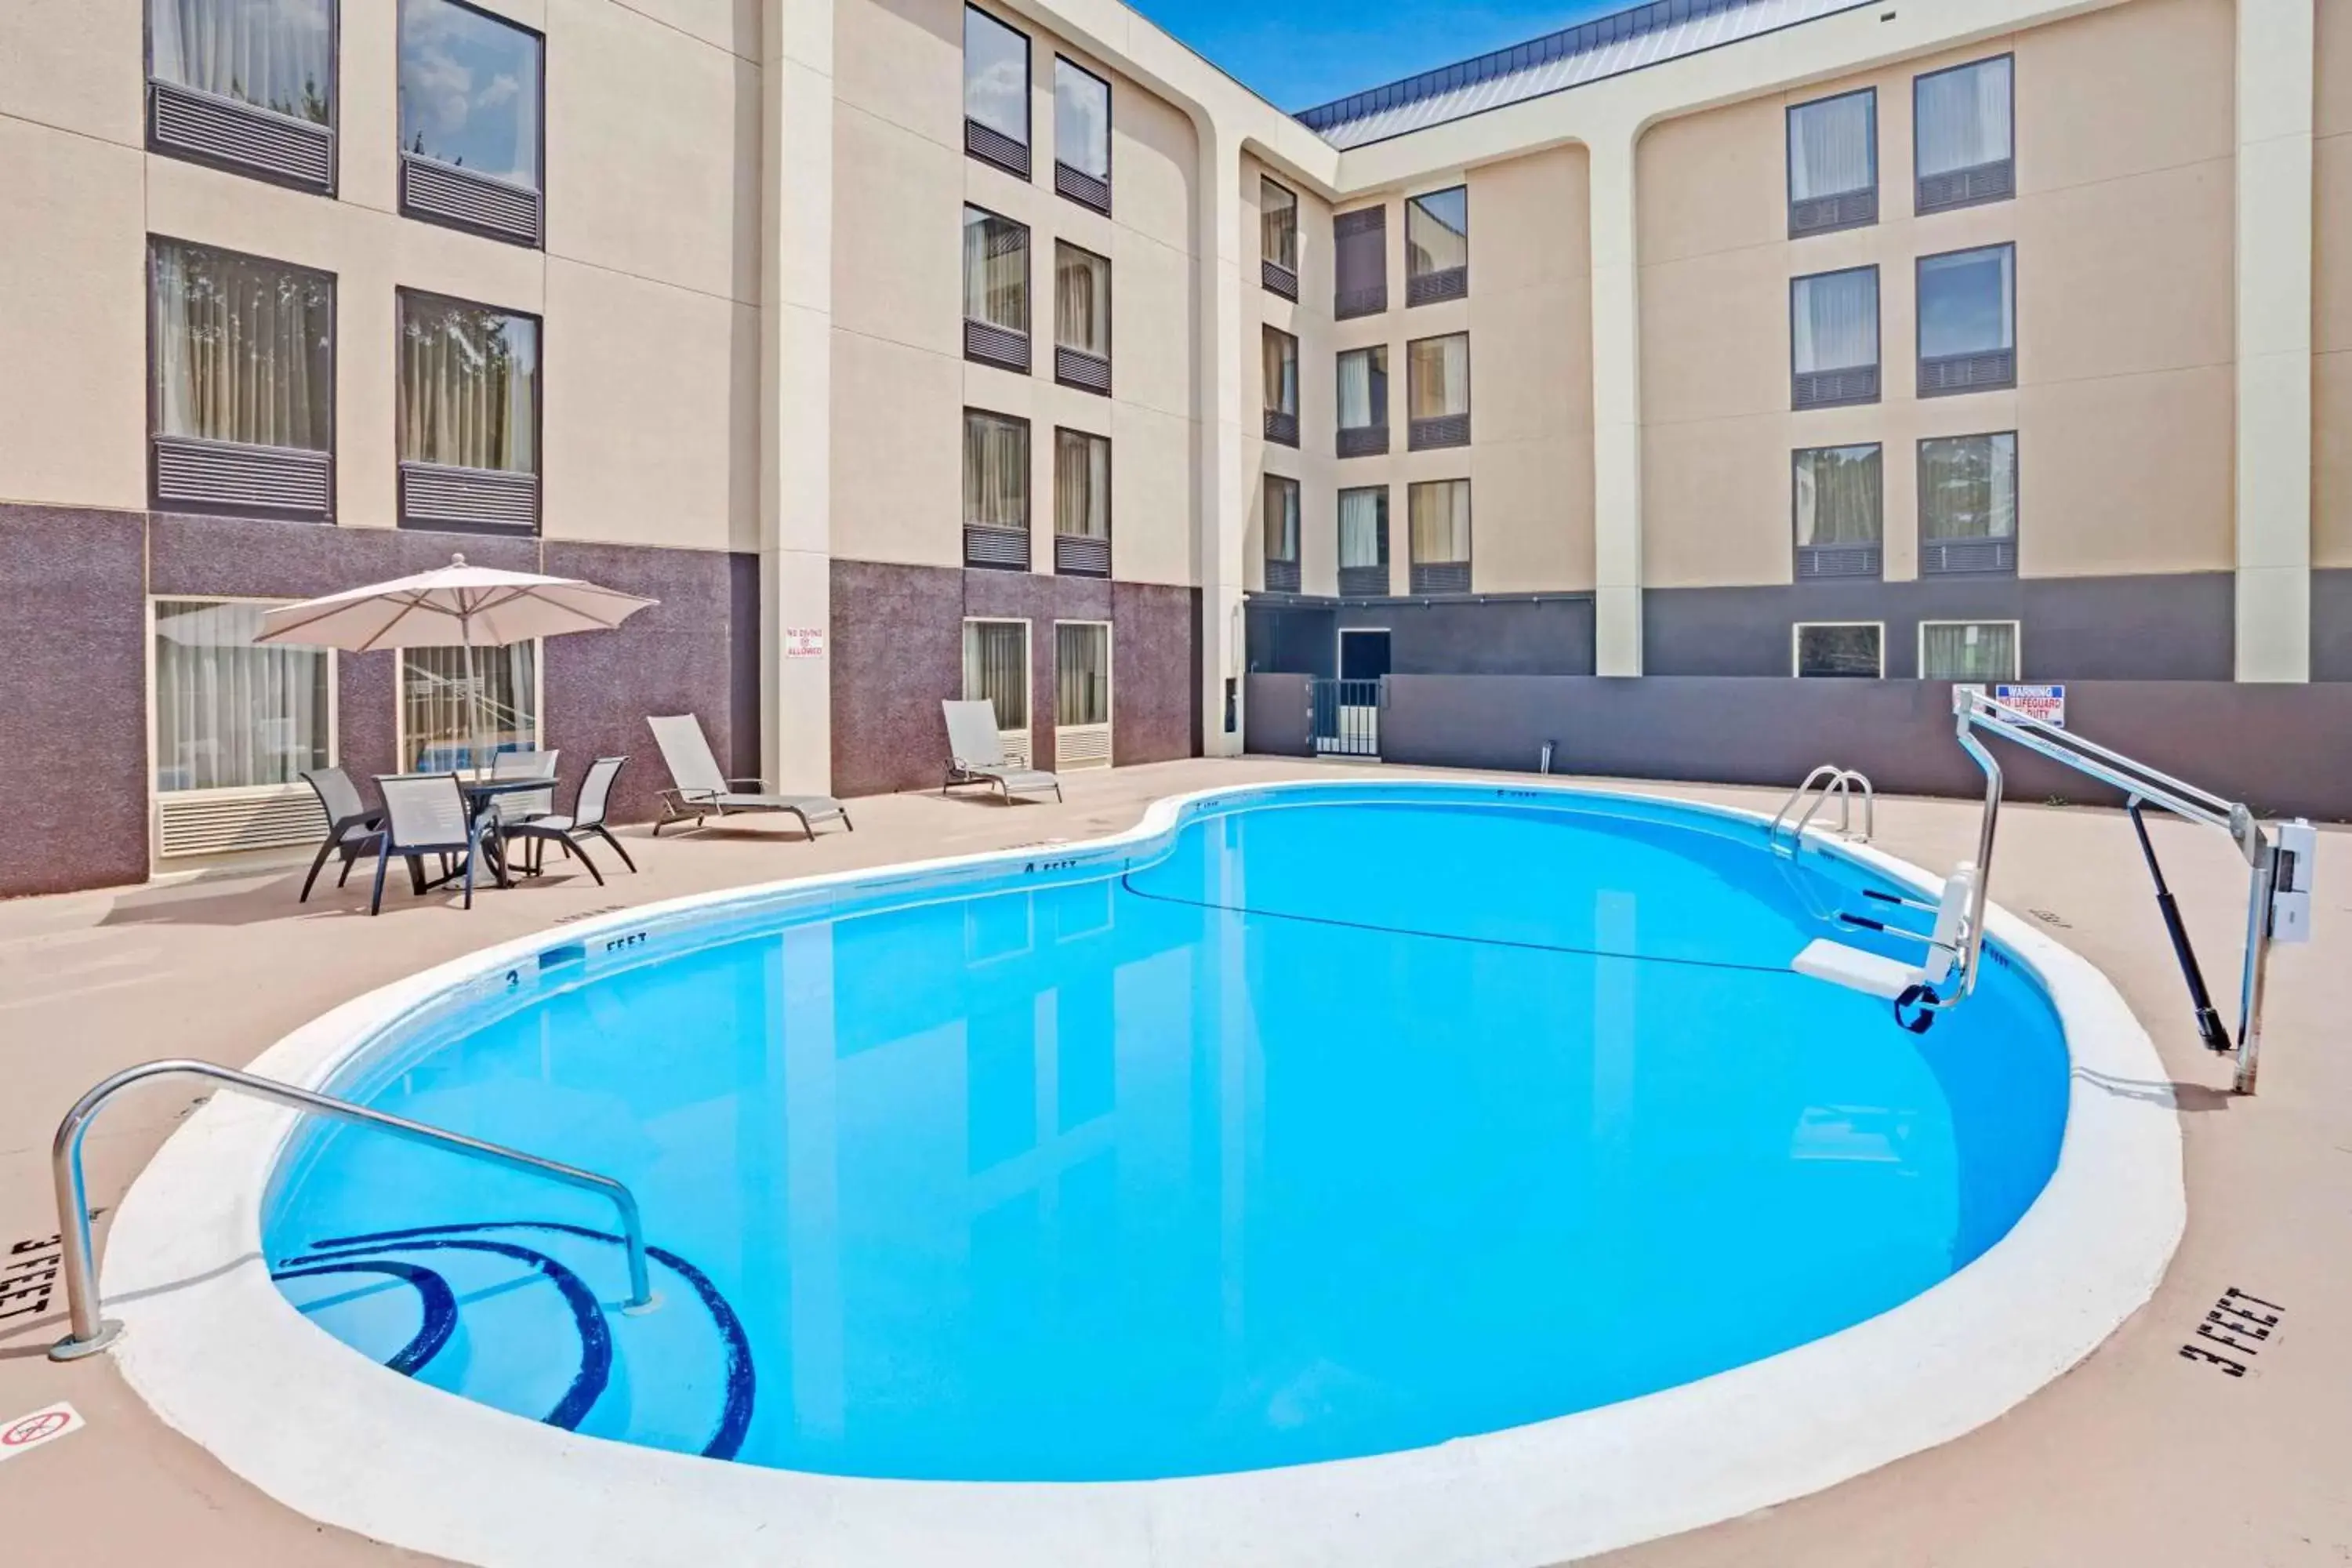 Swimming Pool in Wyndham Garden Charlotte Airport Southeast